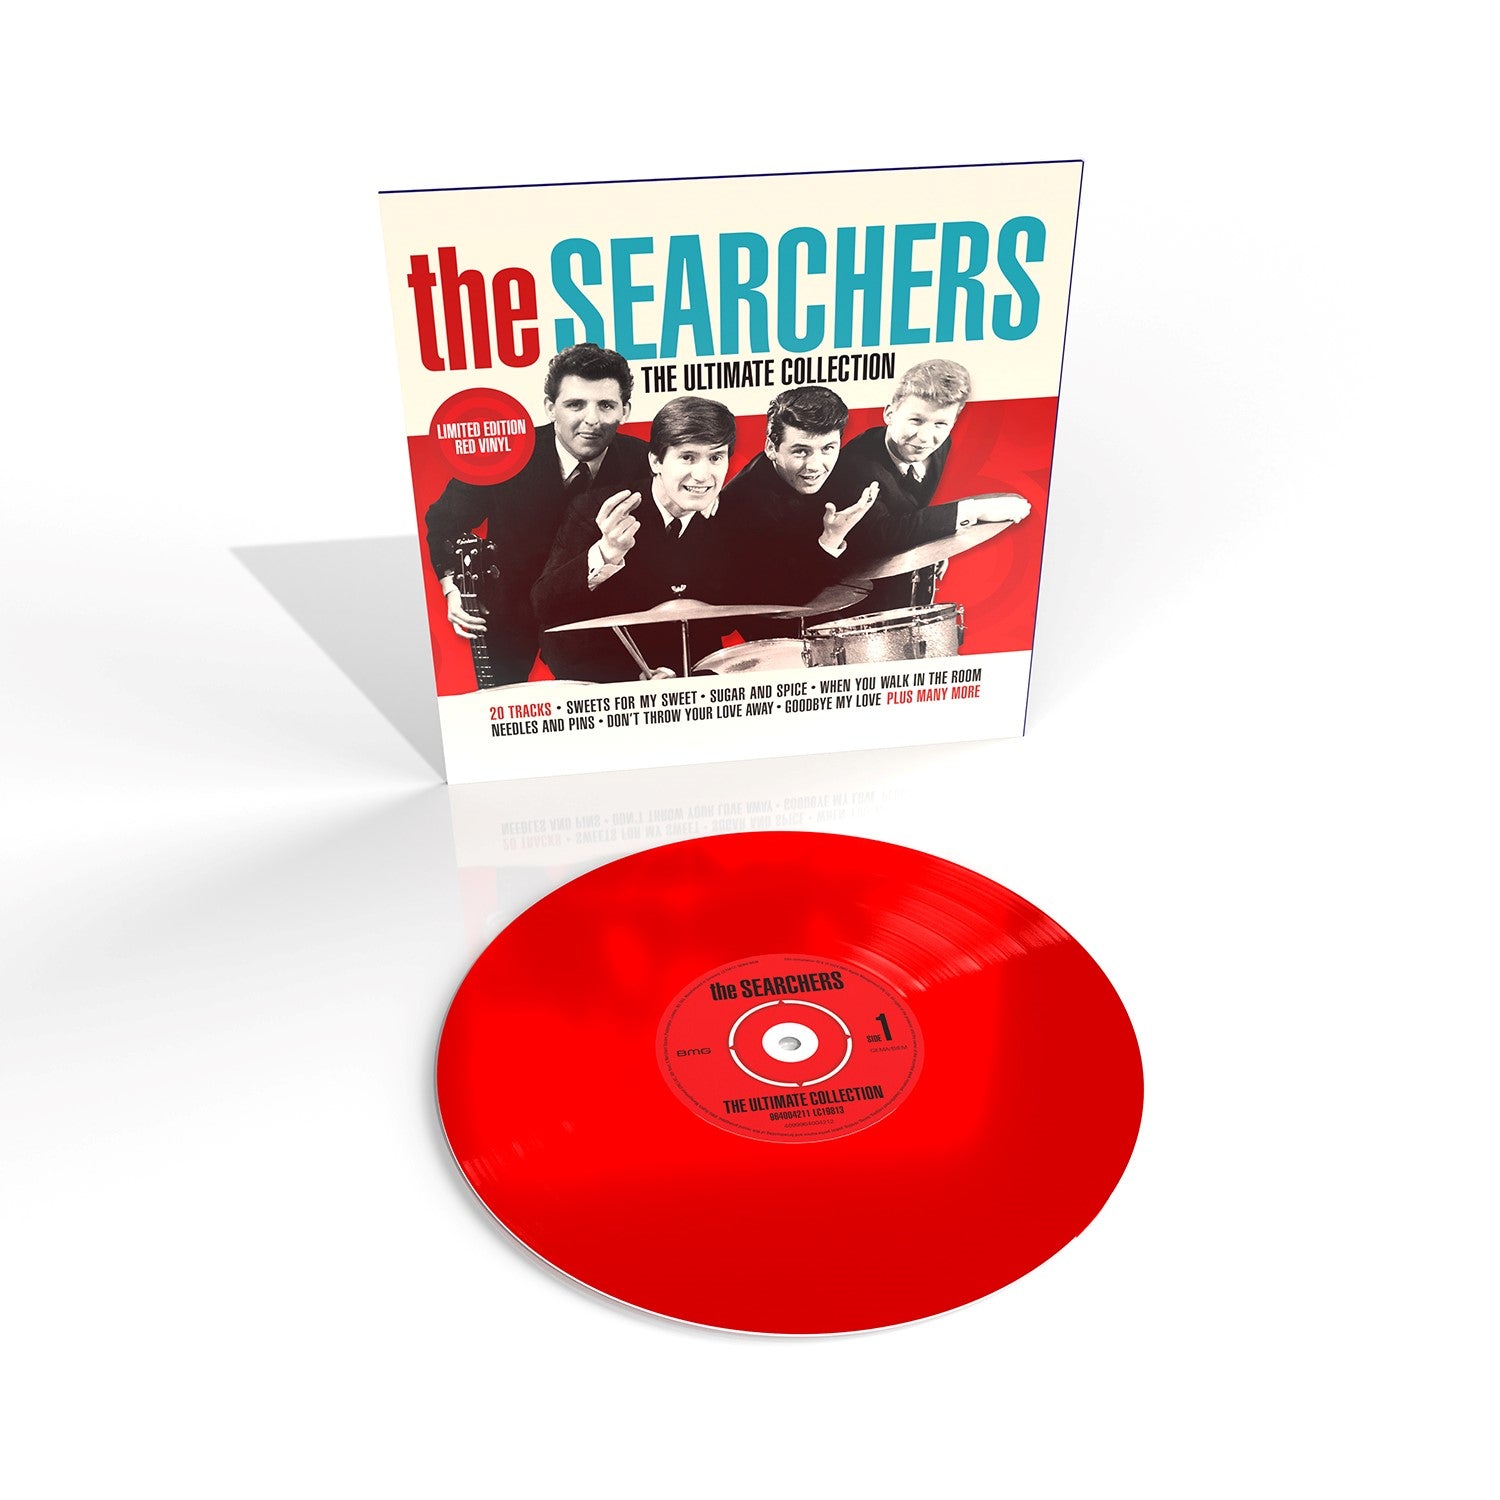 The Searchers - The Ultimate Collection: Red Vinyl LP